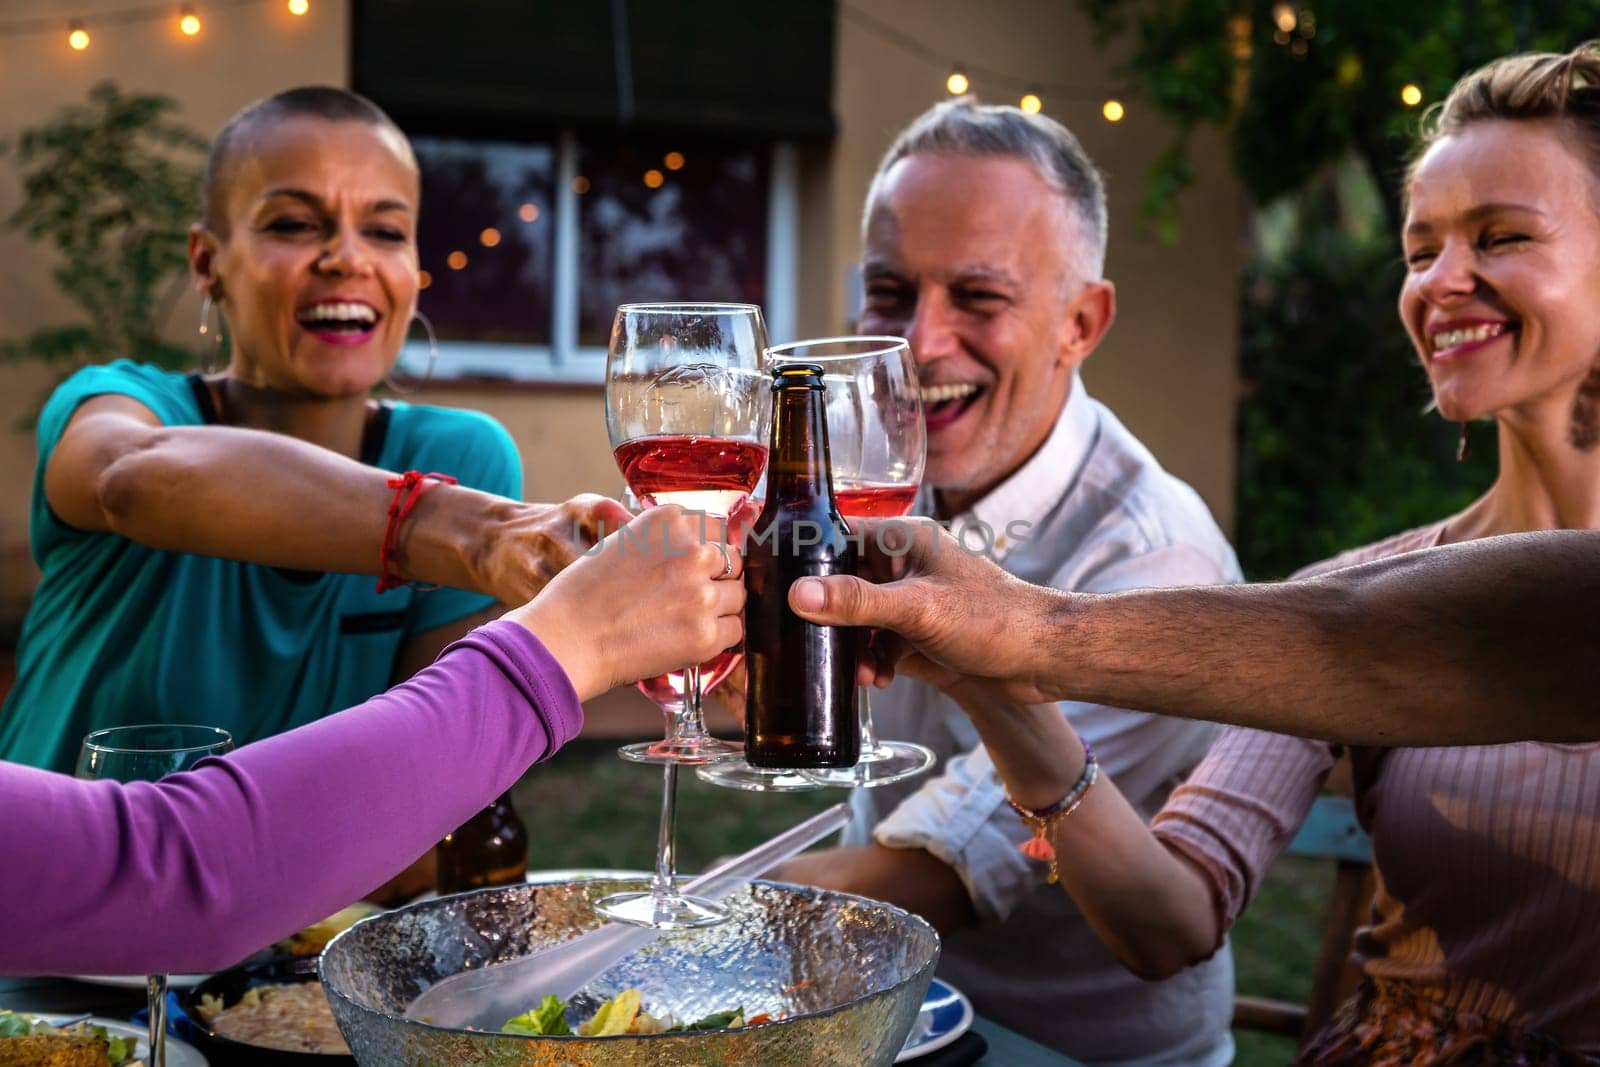 Close-up of smiling, happy friends having fun, toasting with wine and beer during garden dinner party at night. Lifestyle concept.